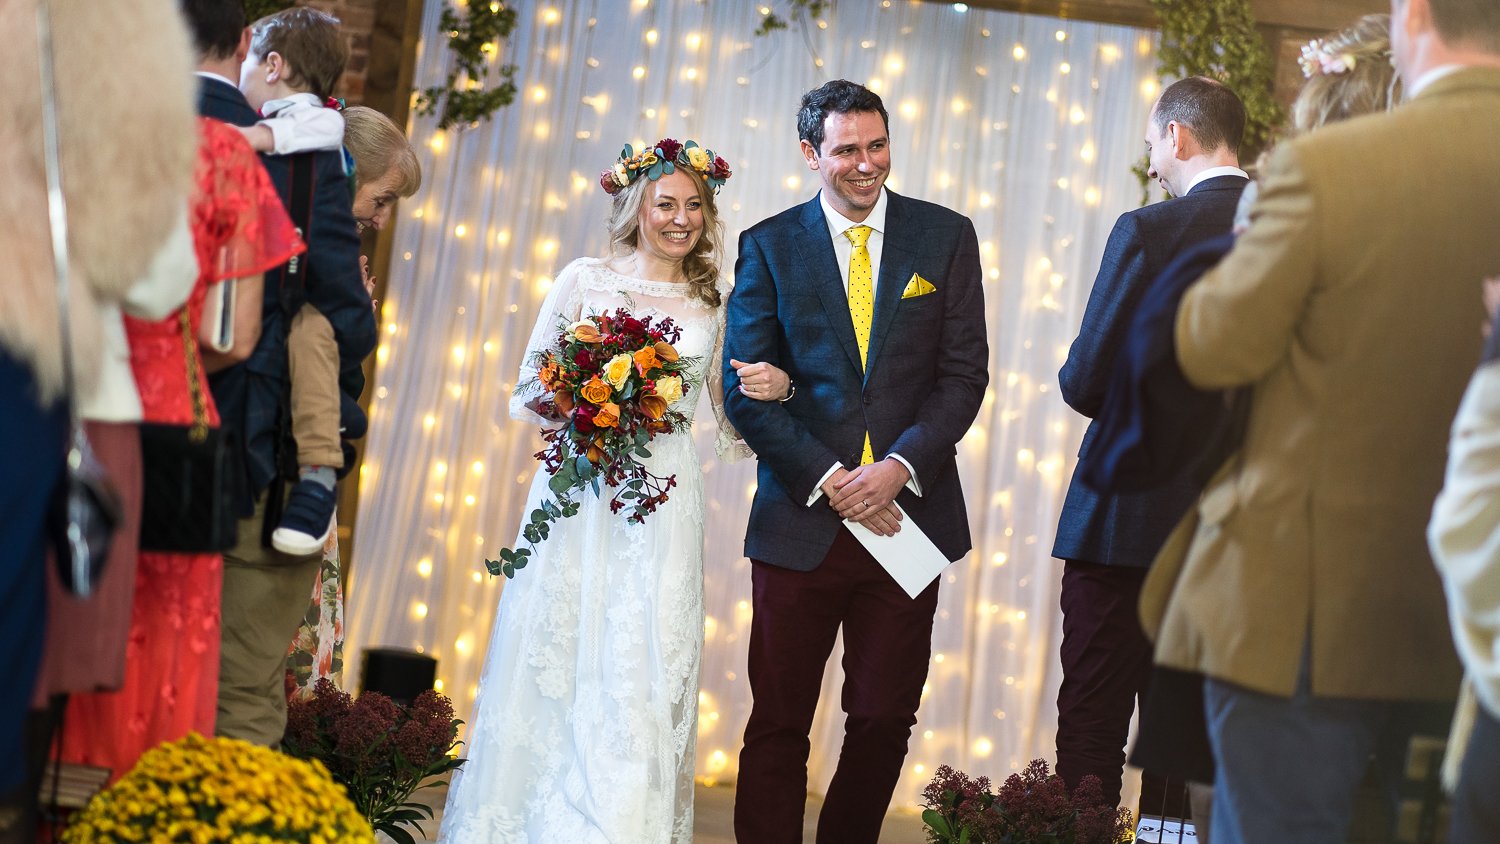 Newly weds walk down aisle happily married